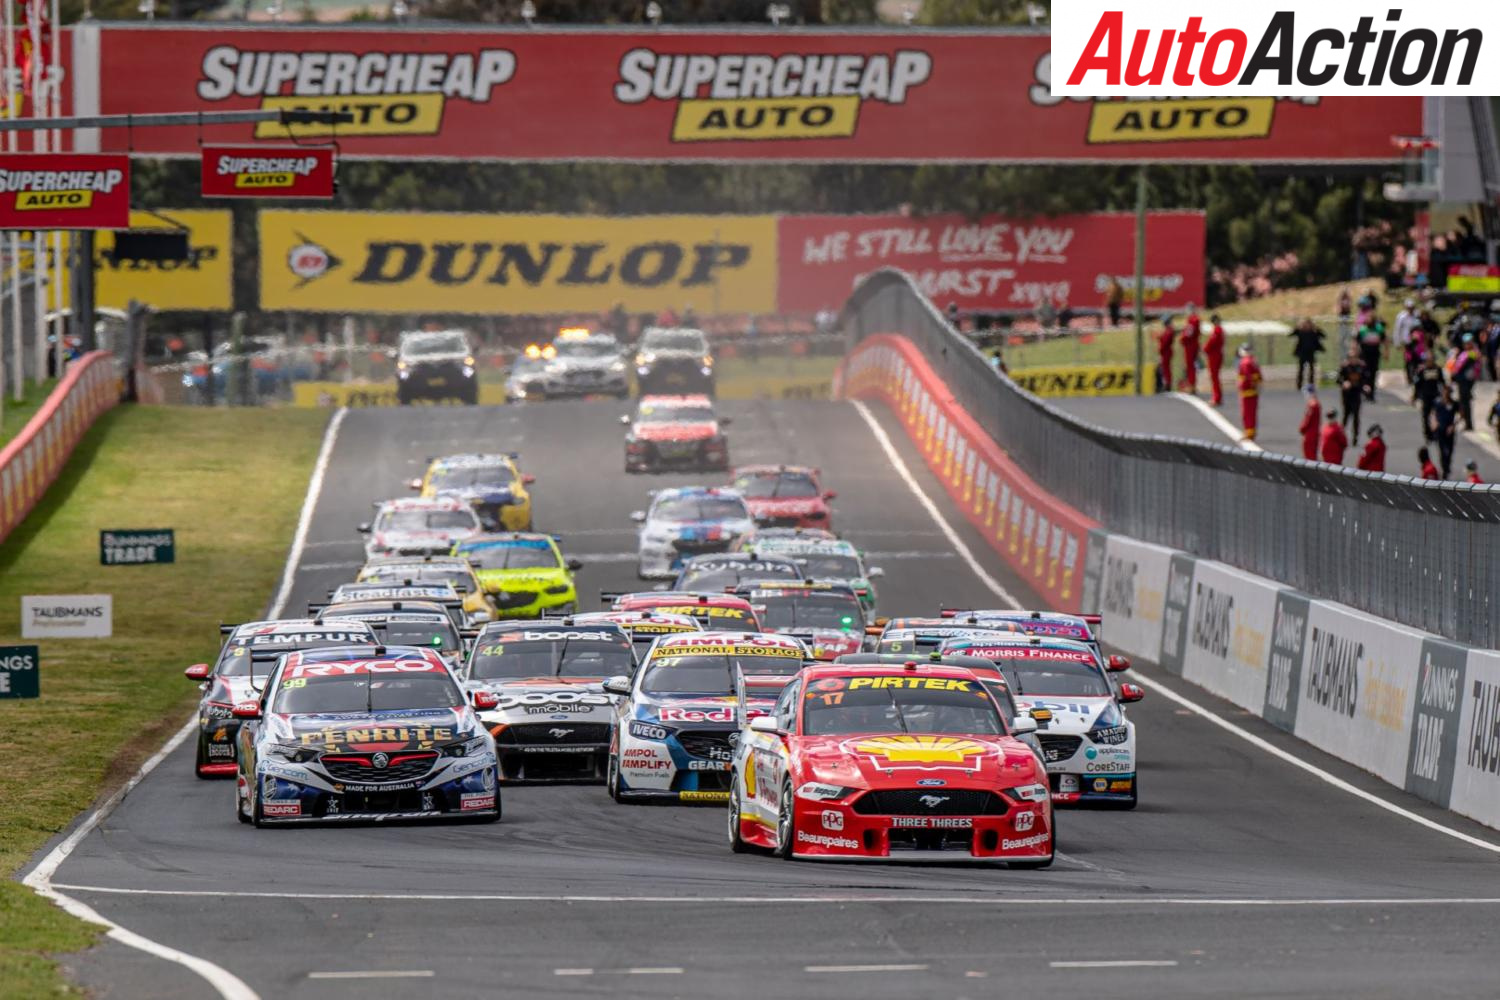 Bathurst 1000 will be the only two-driver race in 2021 - Photo: InSyde Media